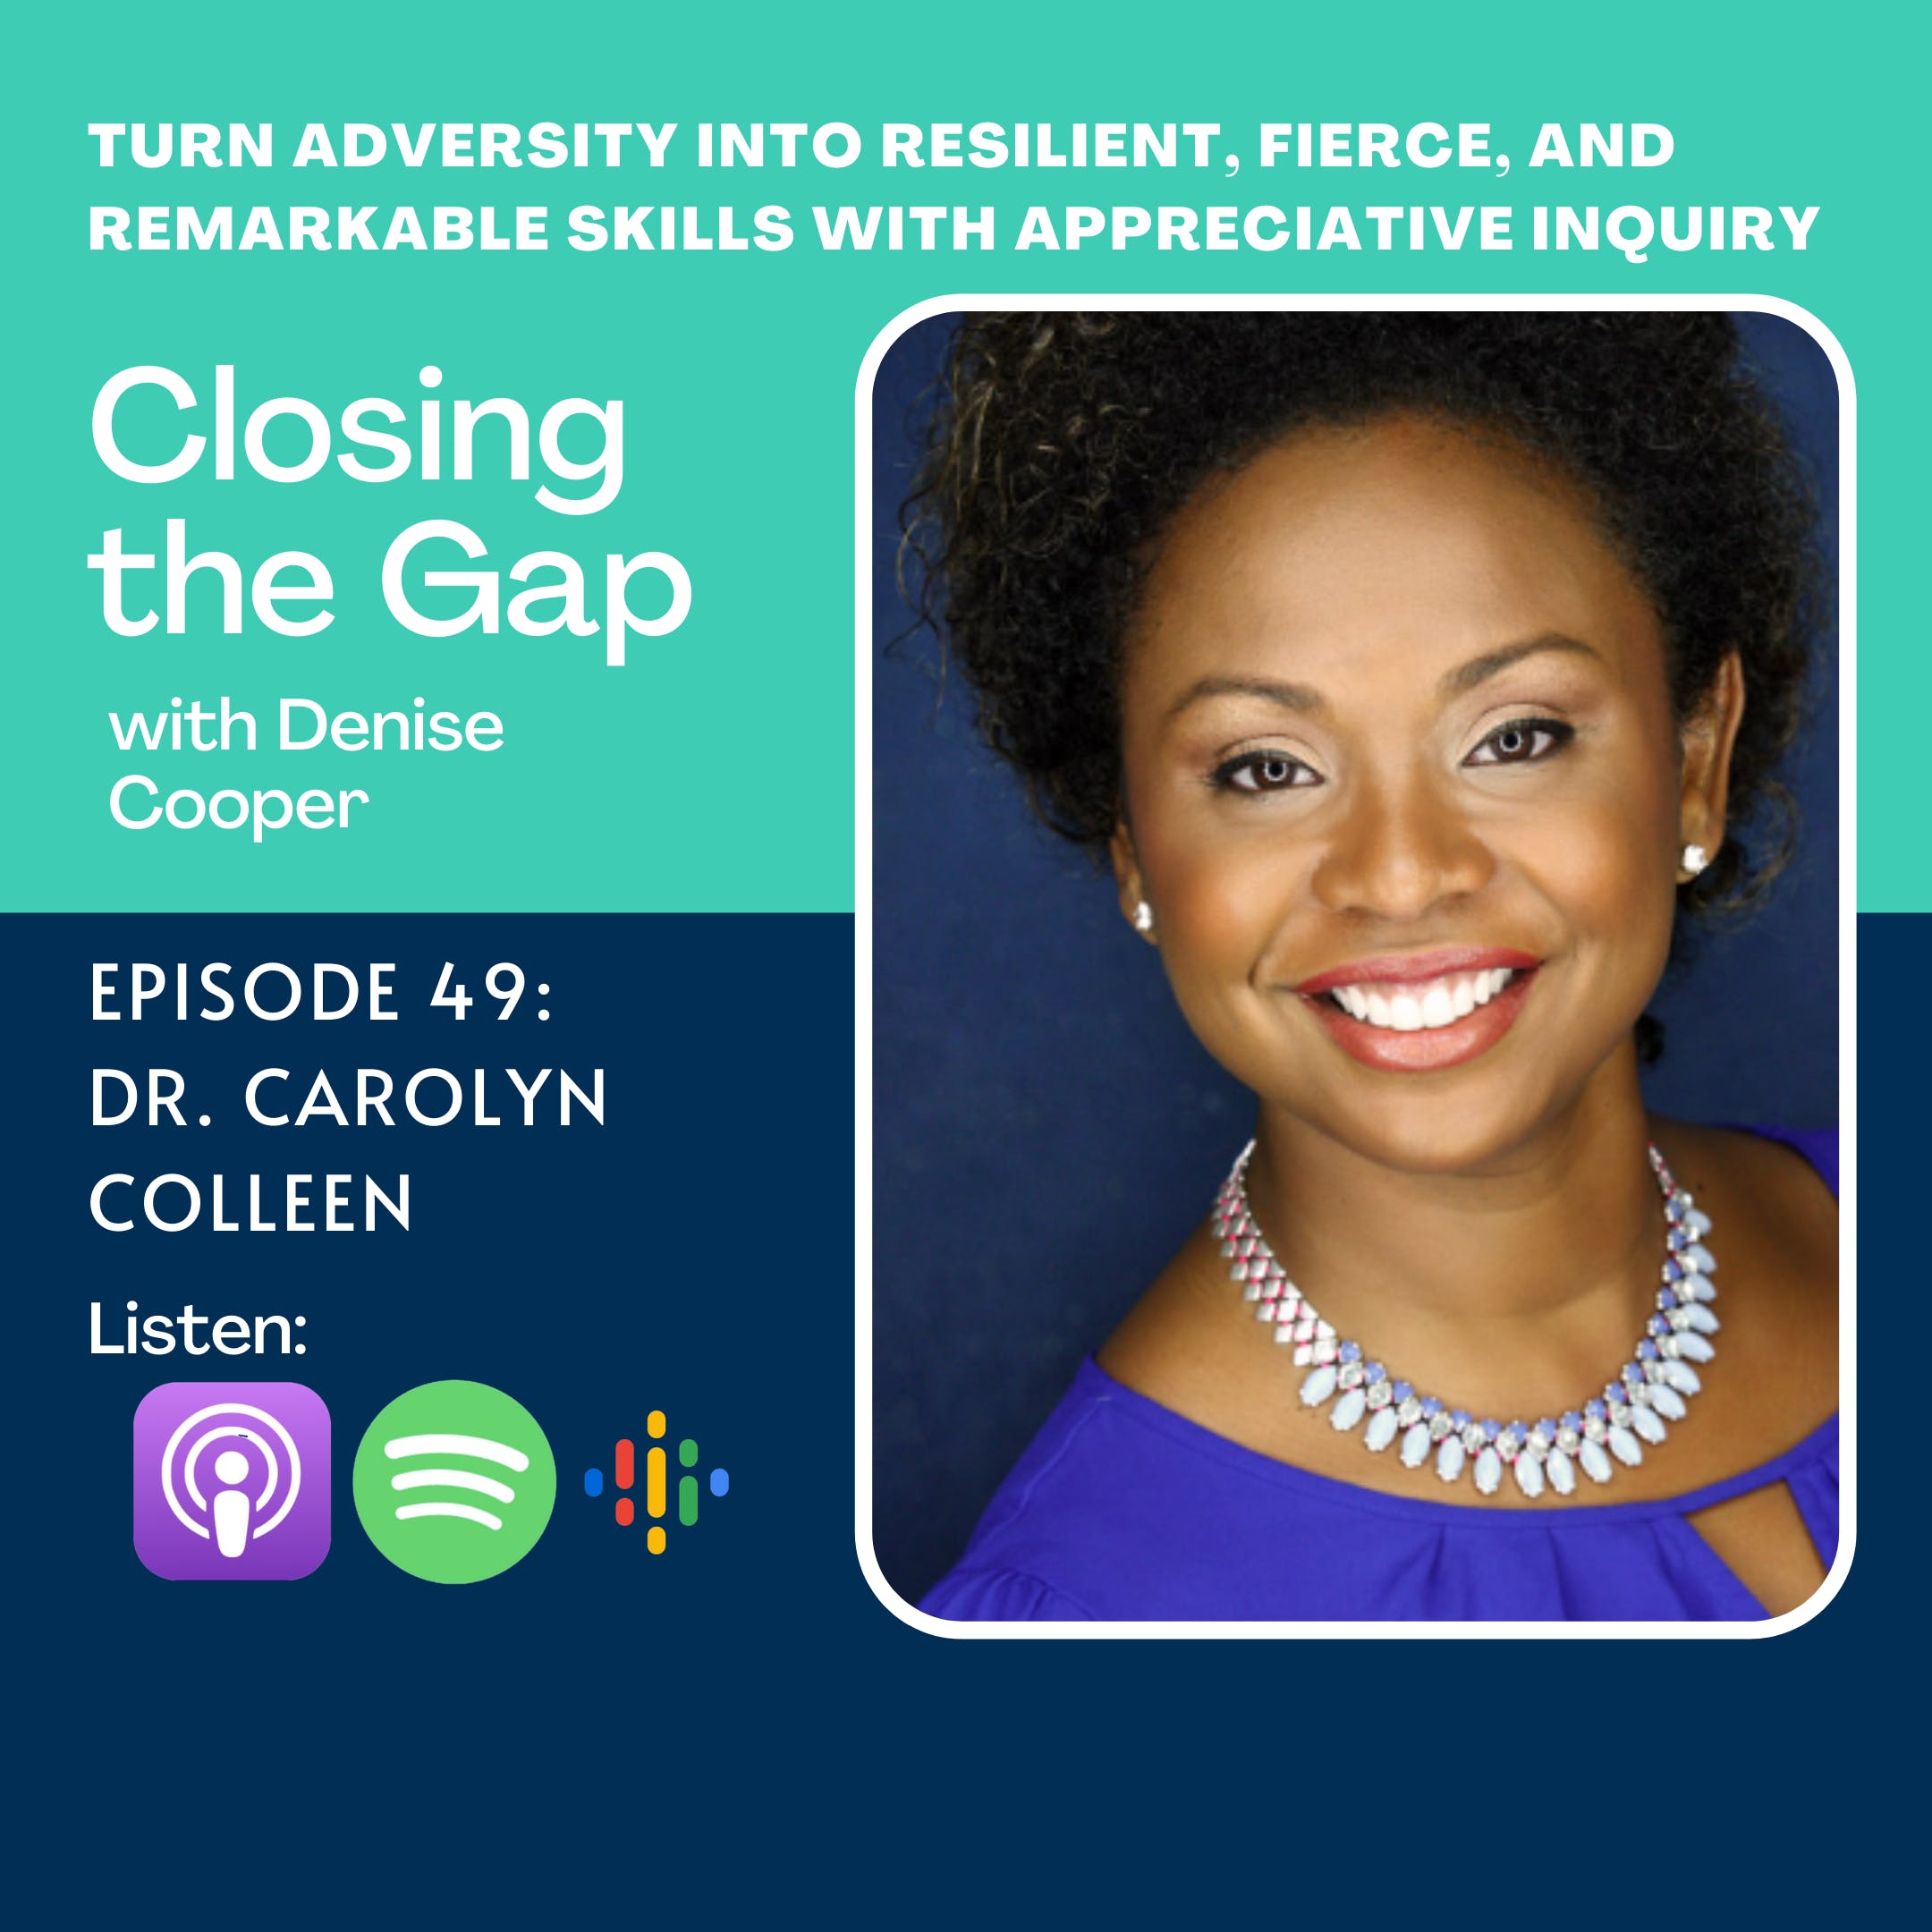 Turn Adversity into Resilient, FIERCE, and Remarkable skills with Appreciative Inquiry with Dr. Carolyn Colleen